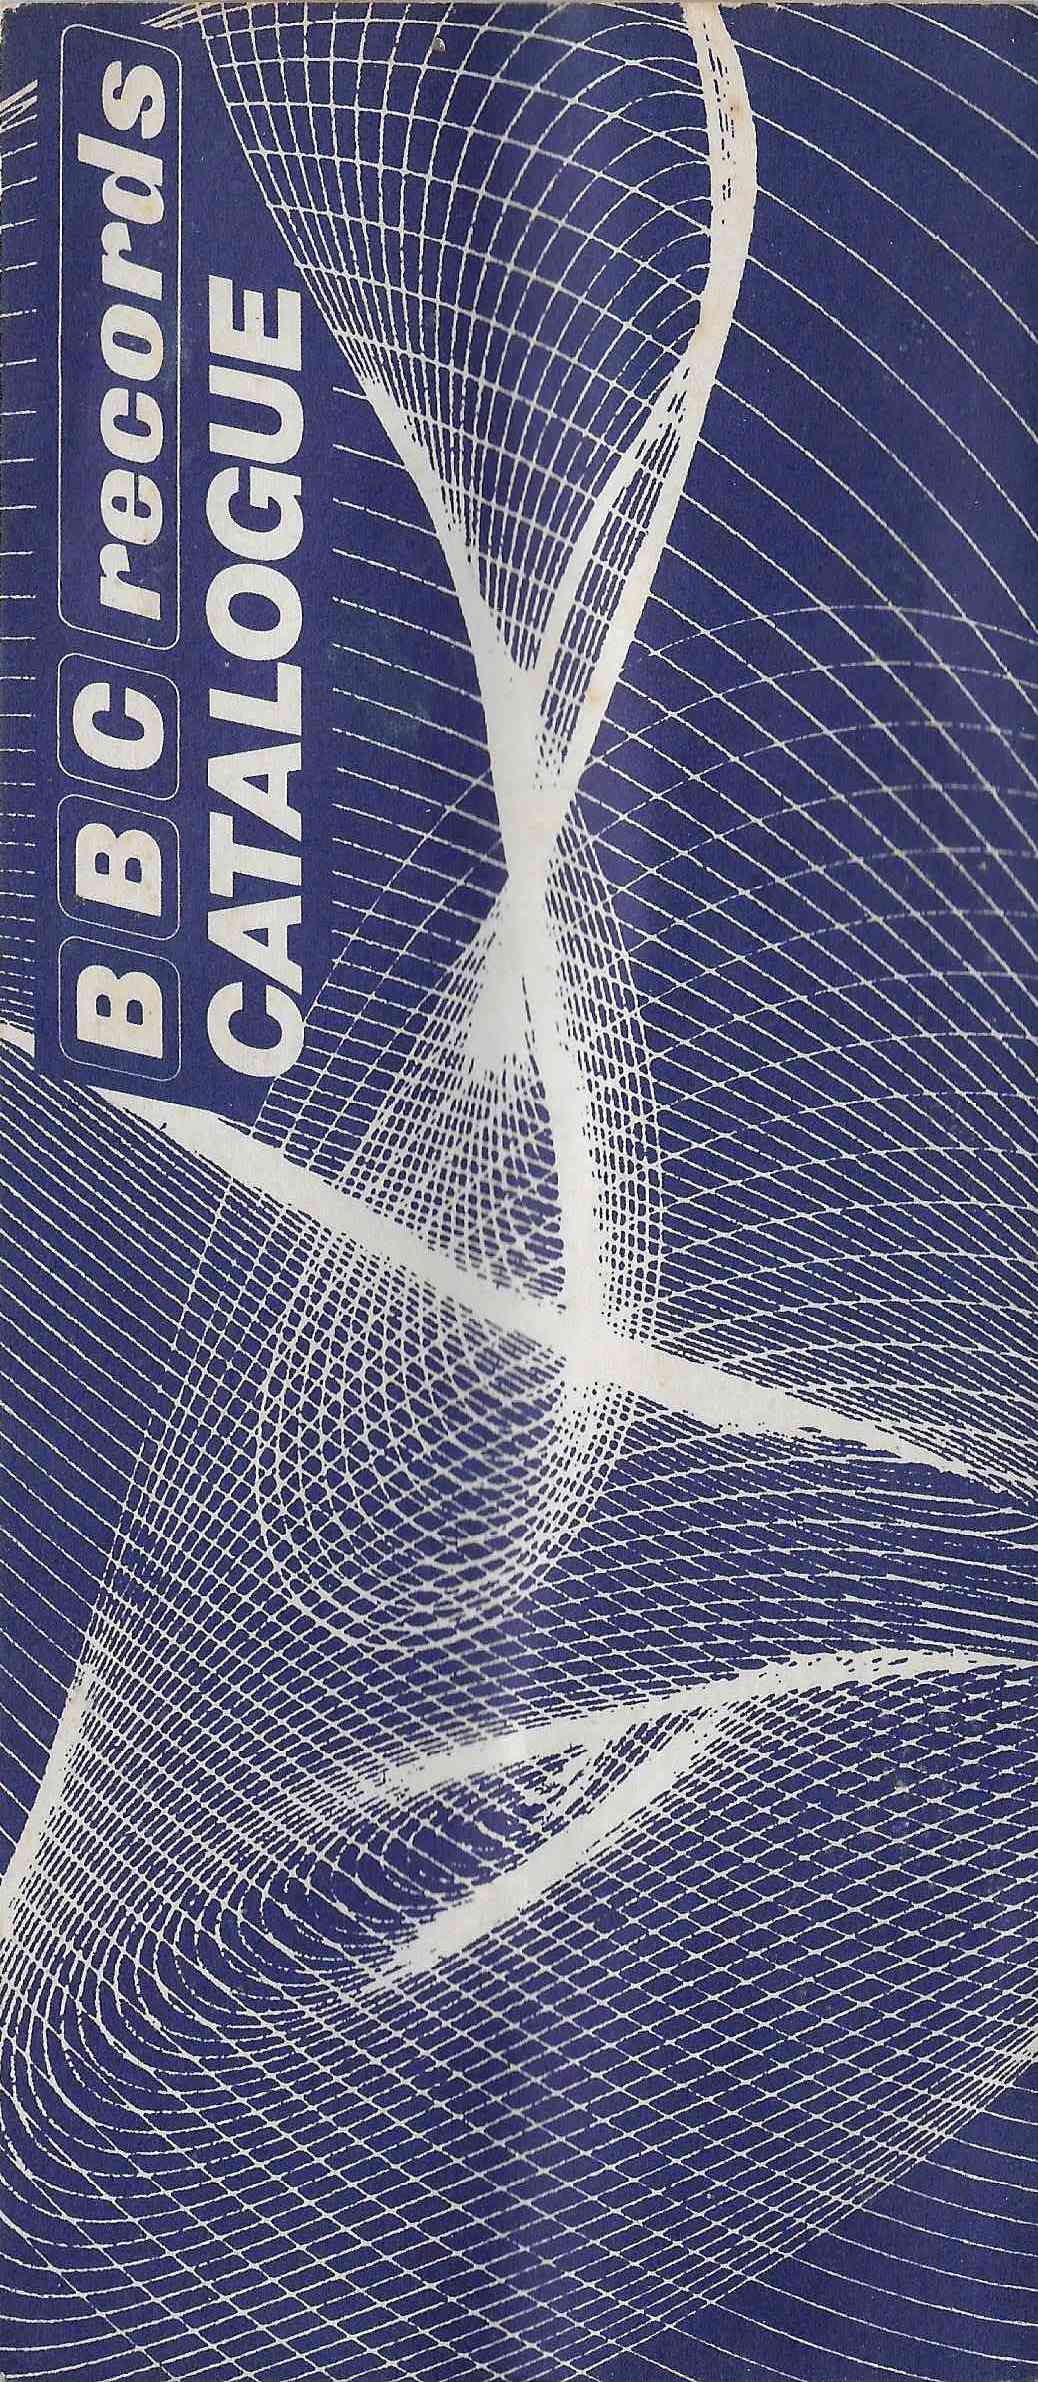 Front cover of catalogue BBC Records catalogue 1972